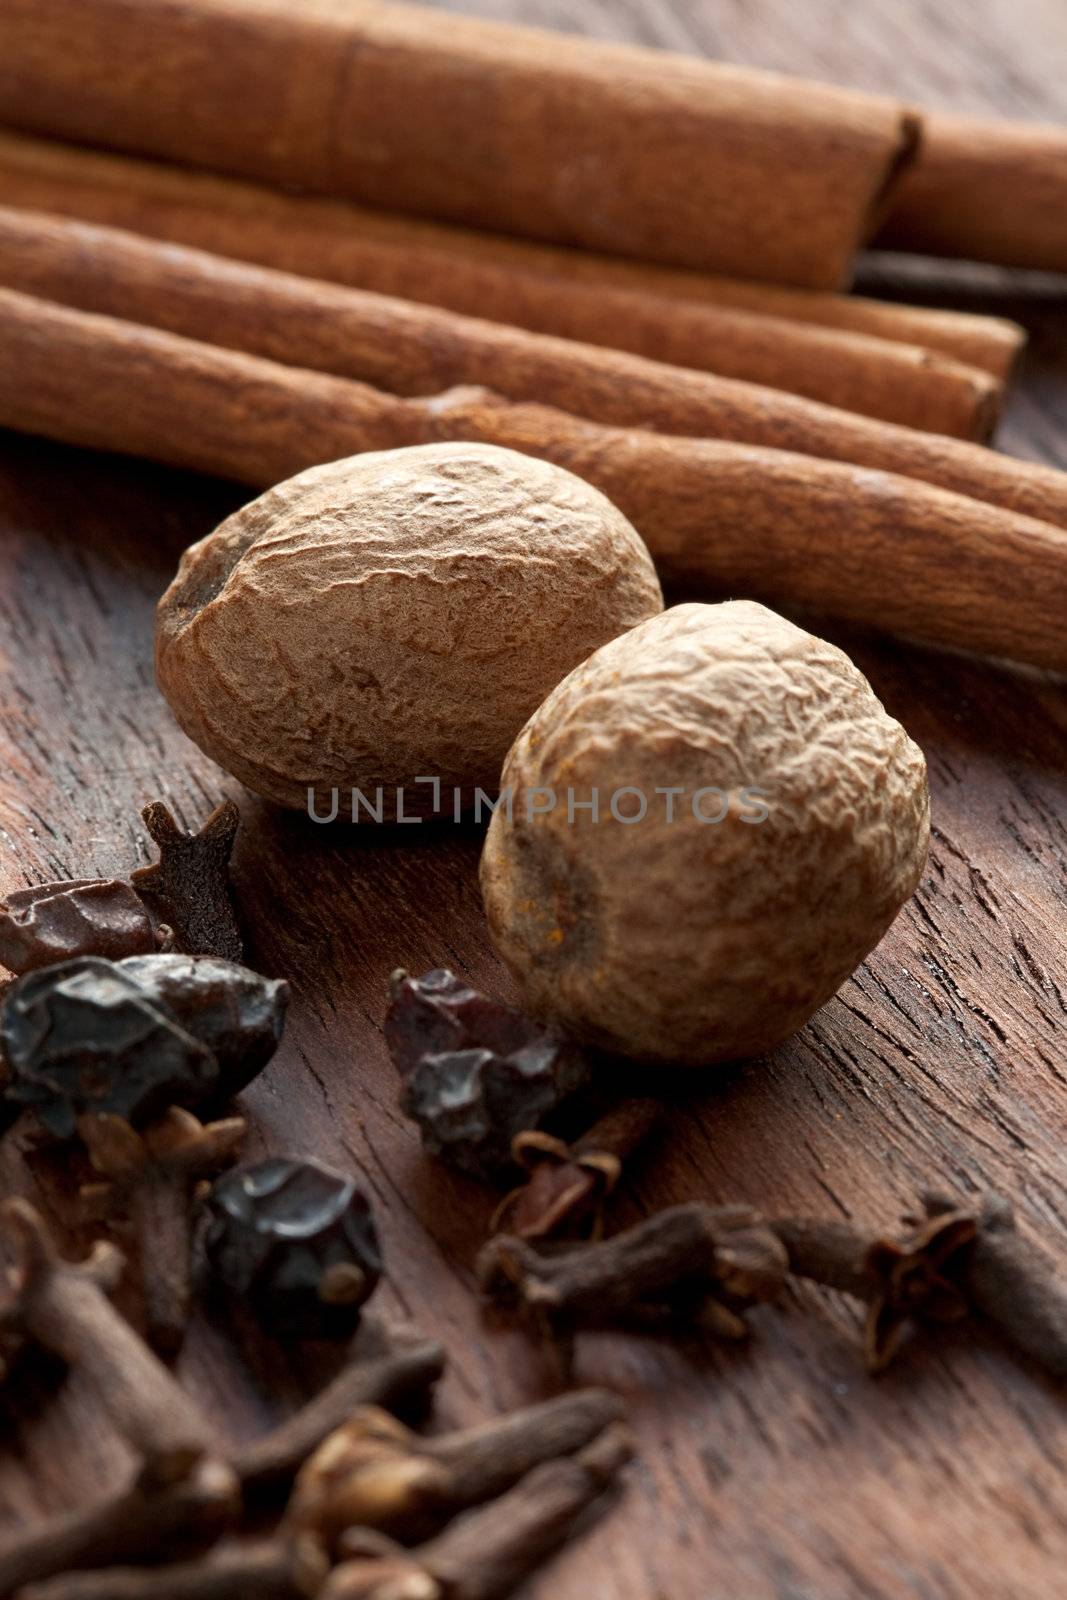 Cinnamon, nutmeg, cloves and other spices on wooden background